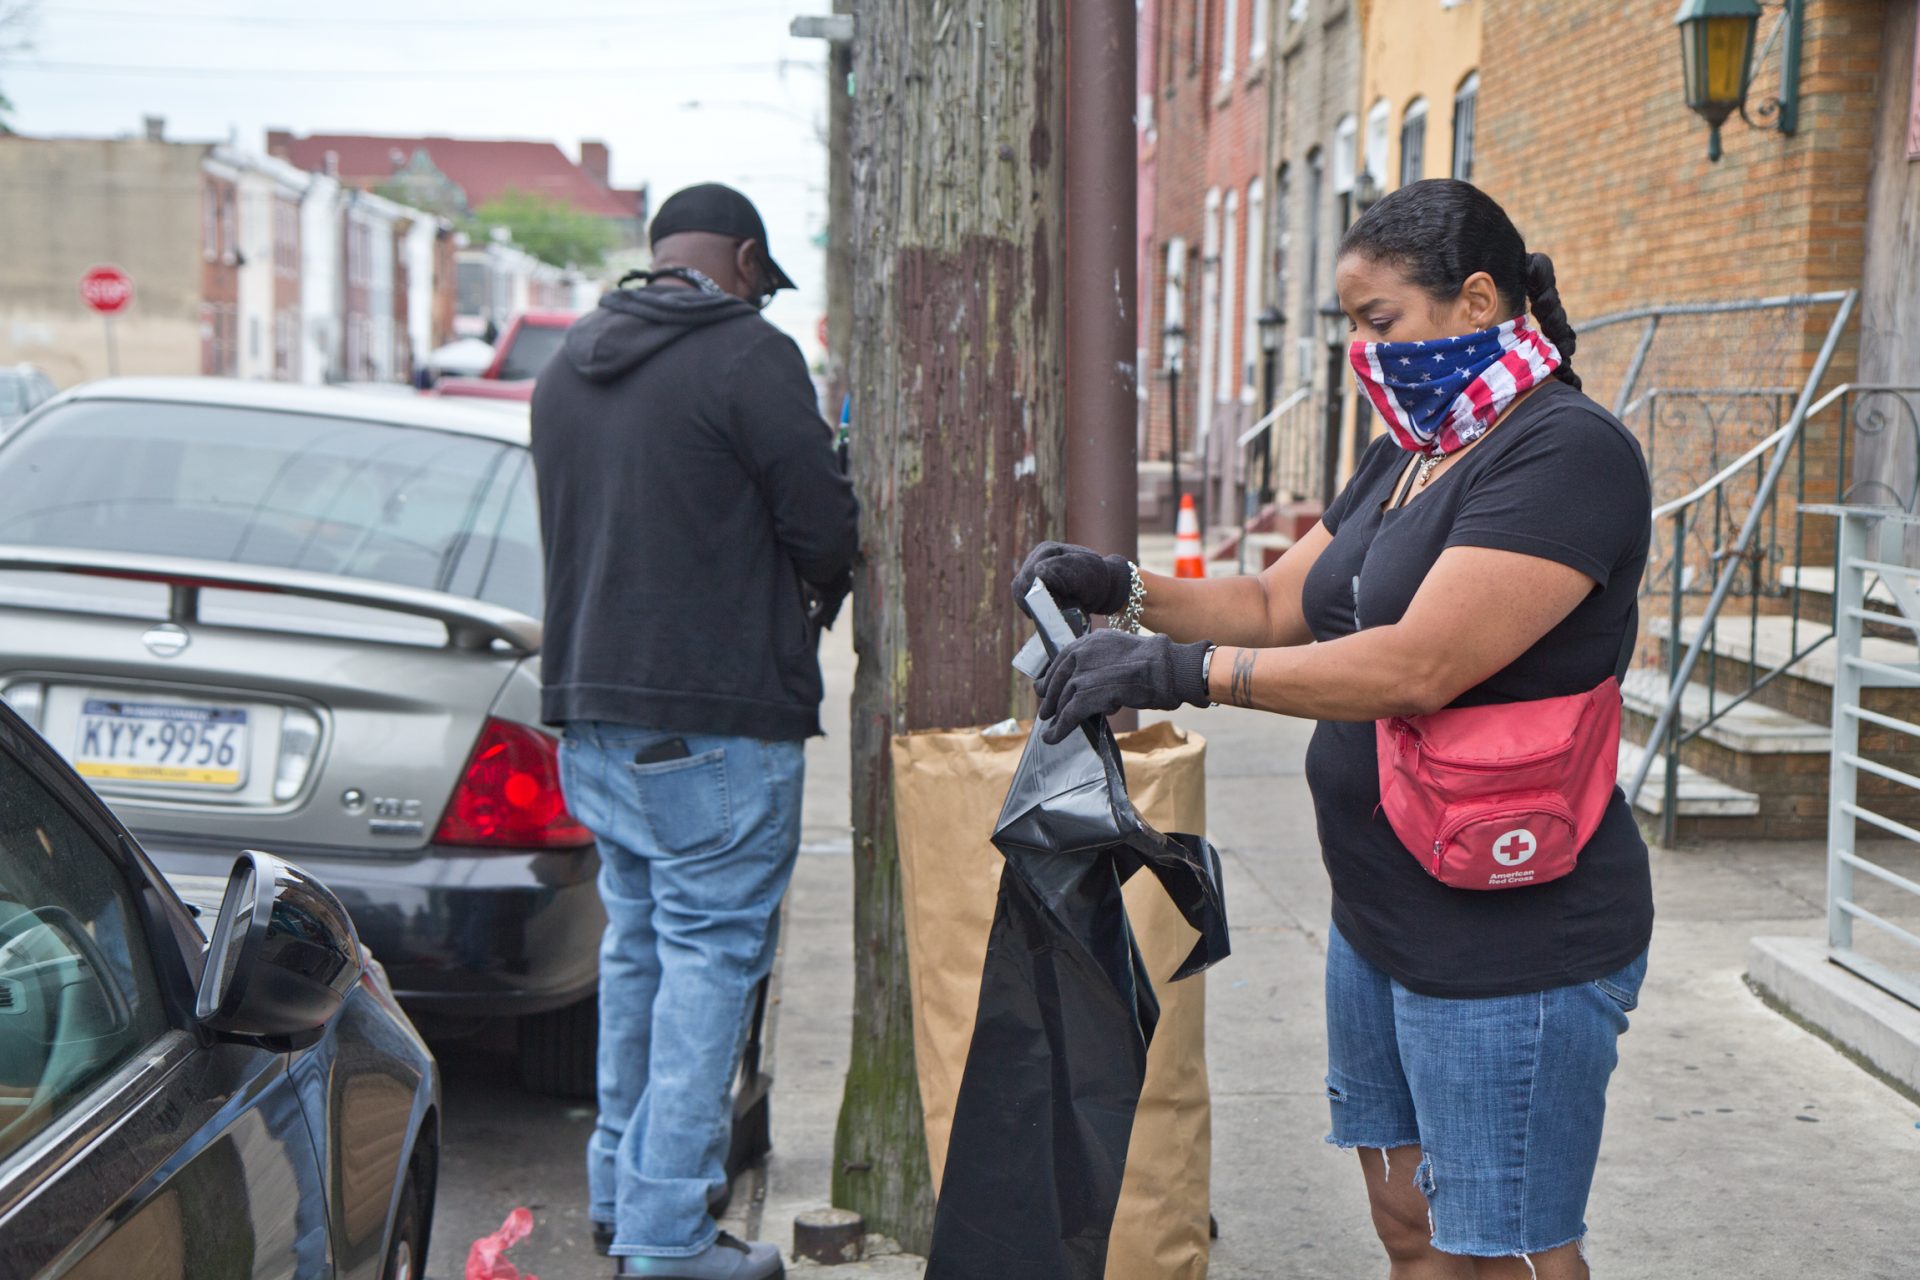 Kensington resident and community leader Rosalind Pichardo (right) was out Tuesday morning cleaning streets after a night of unrest.